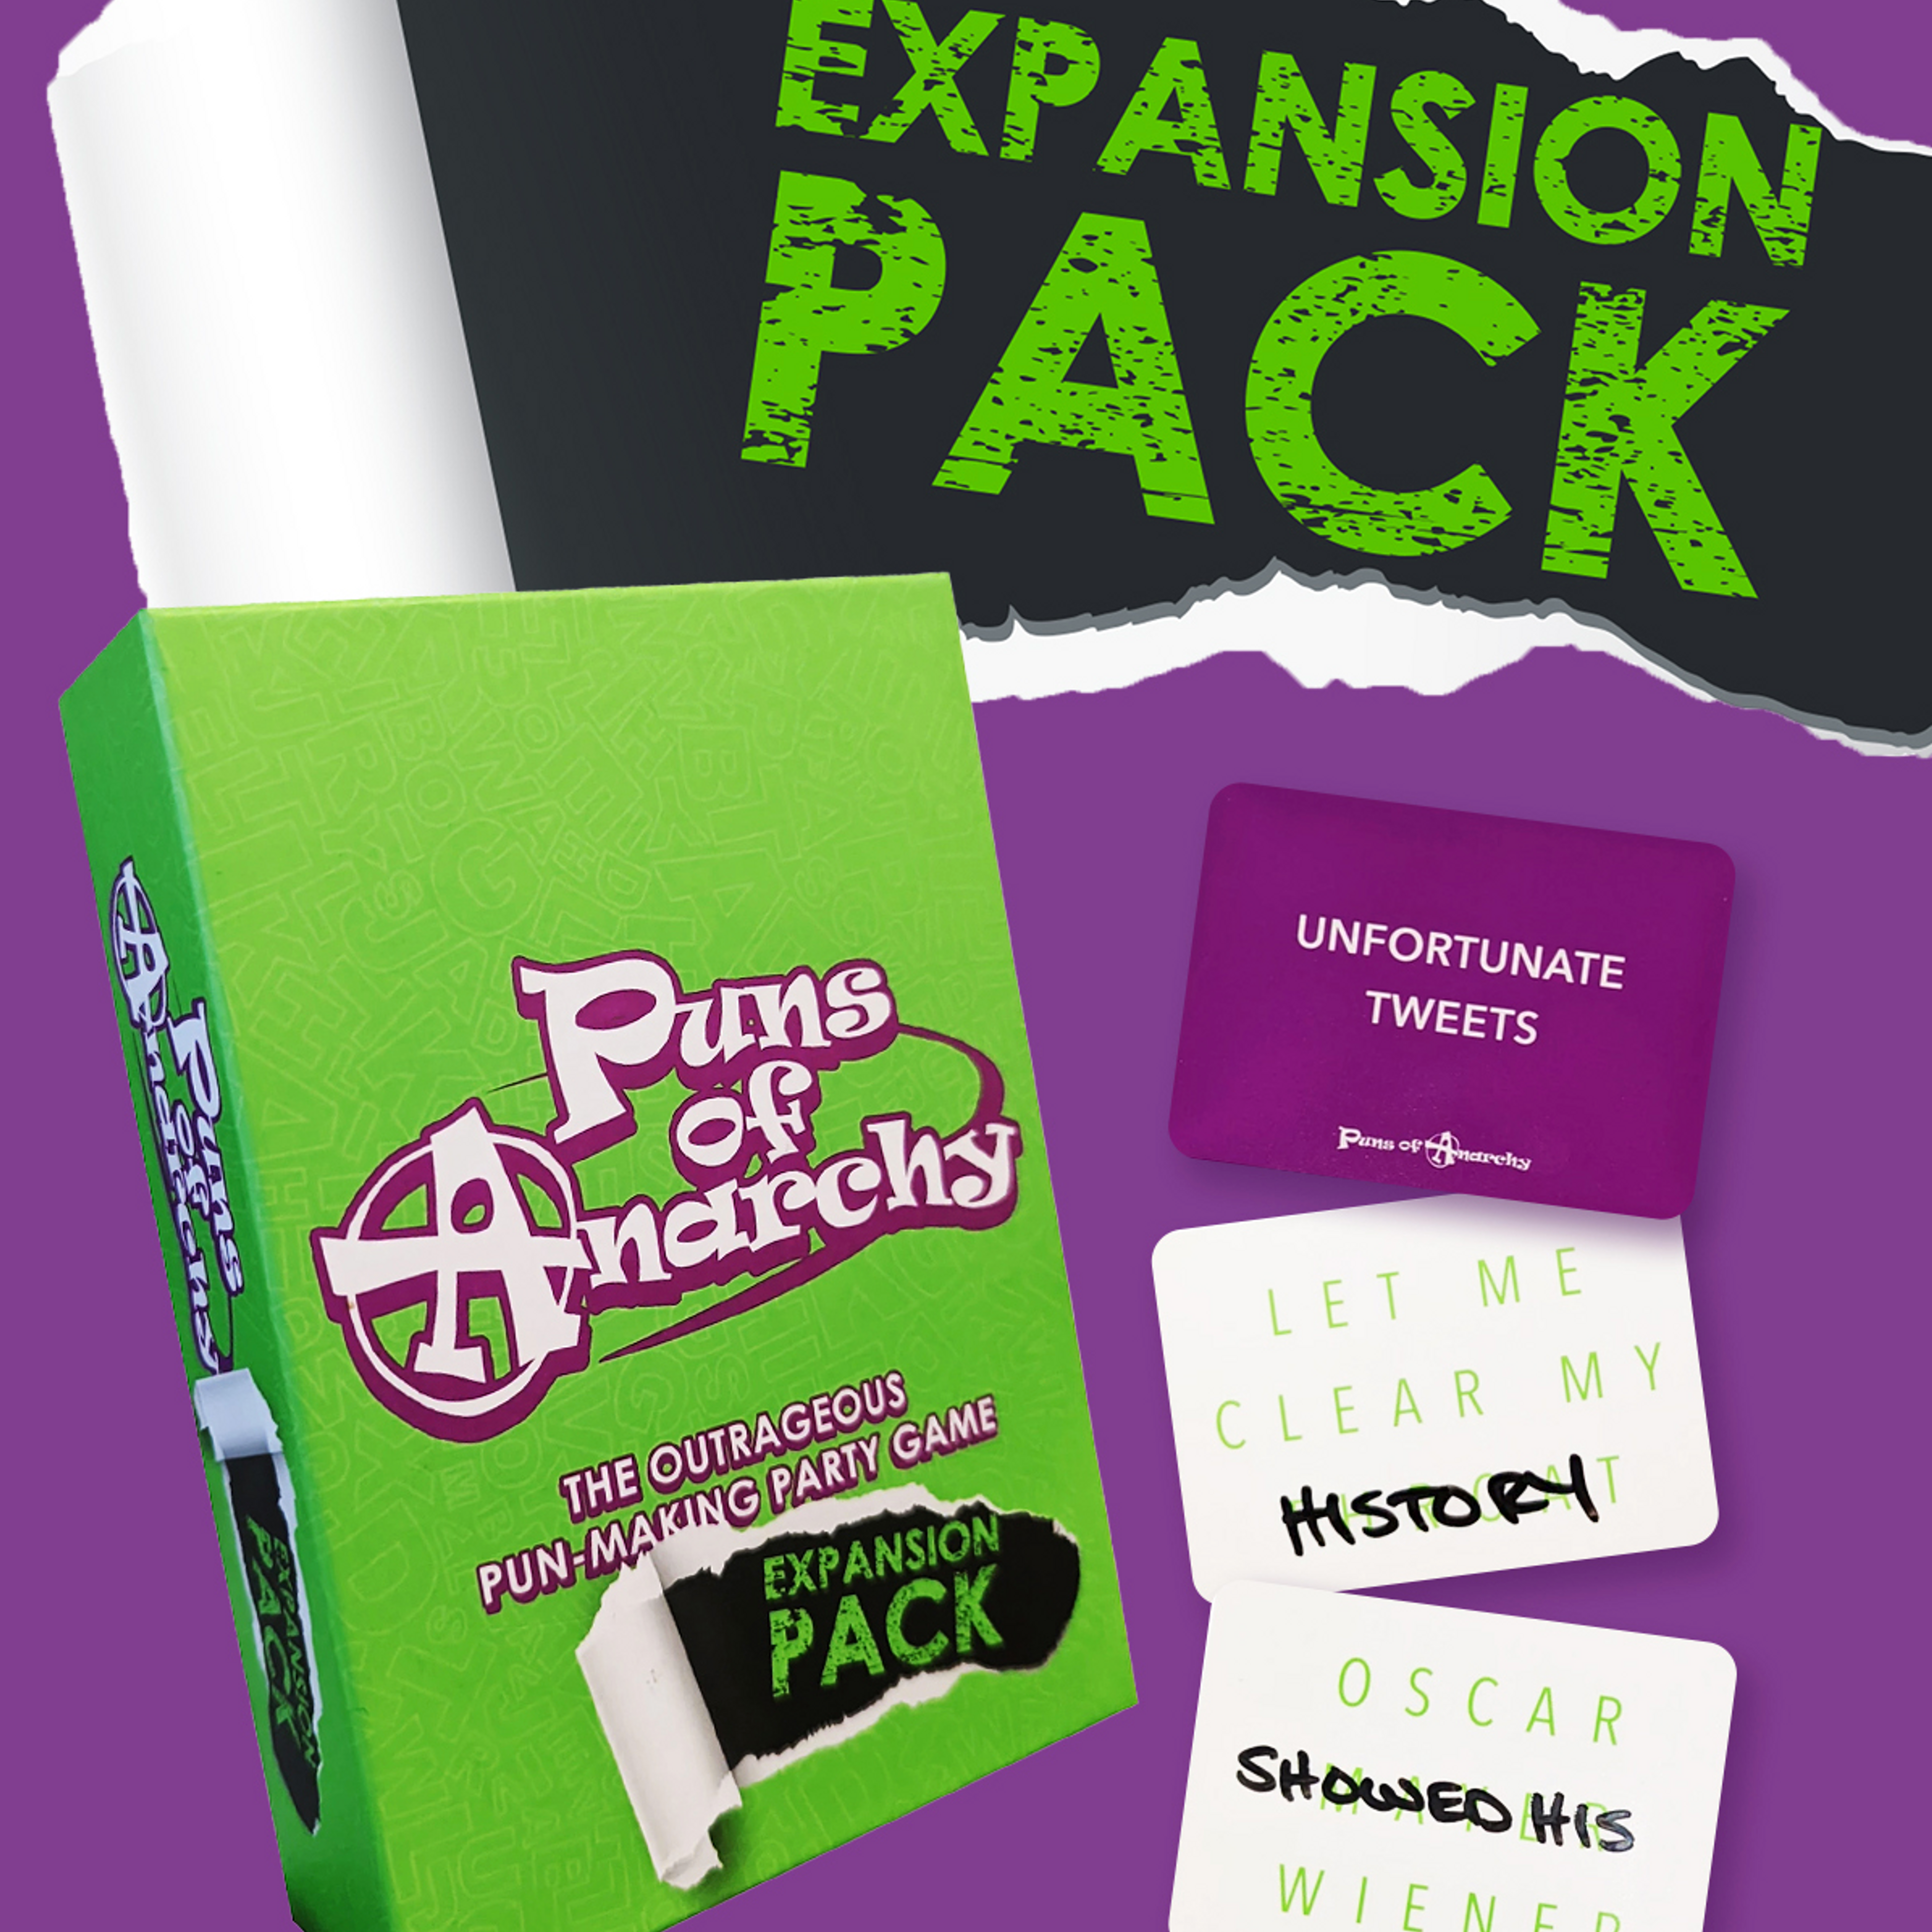 Puns of Anarchy: Expansion Pack